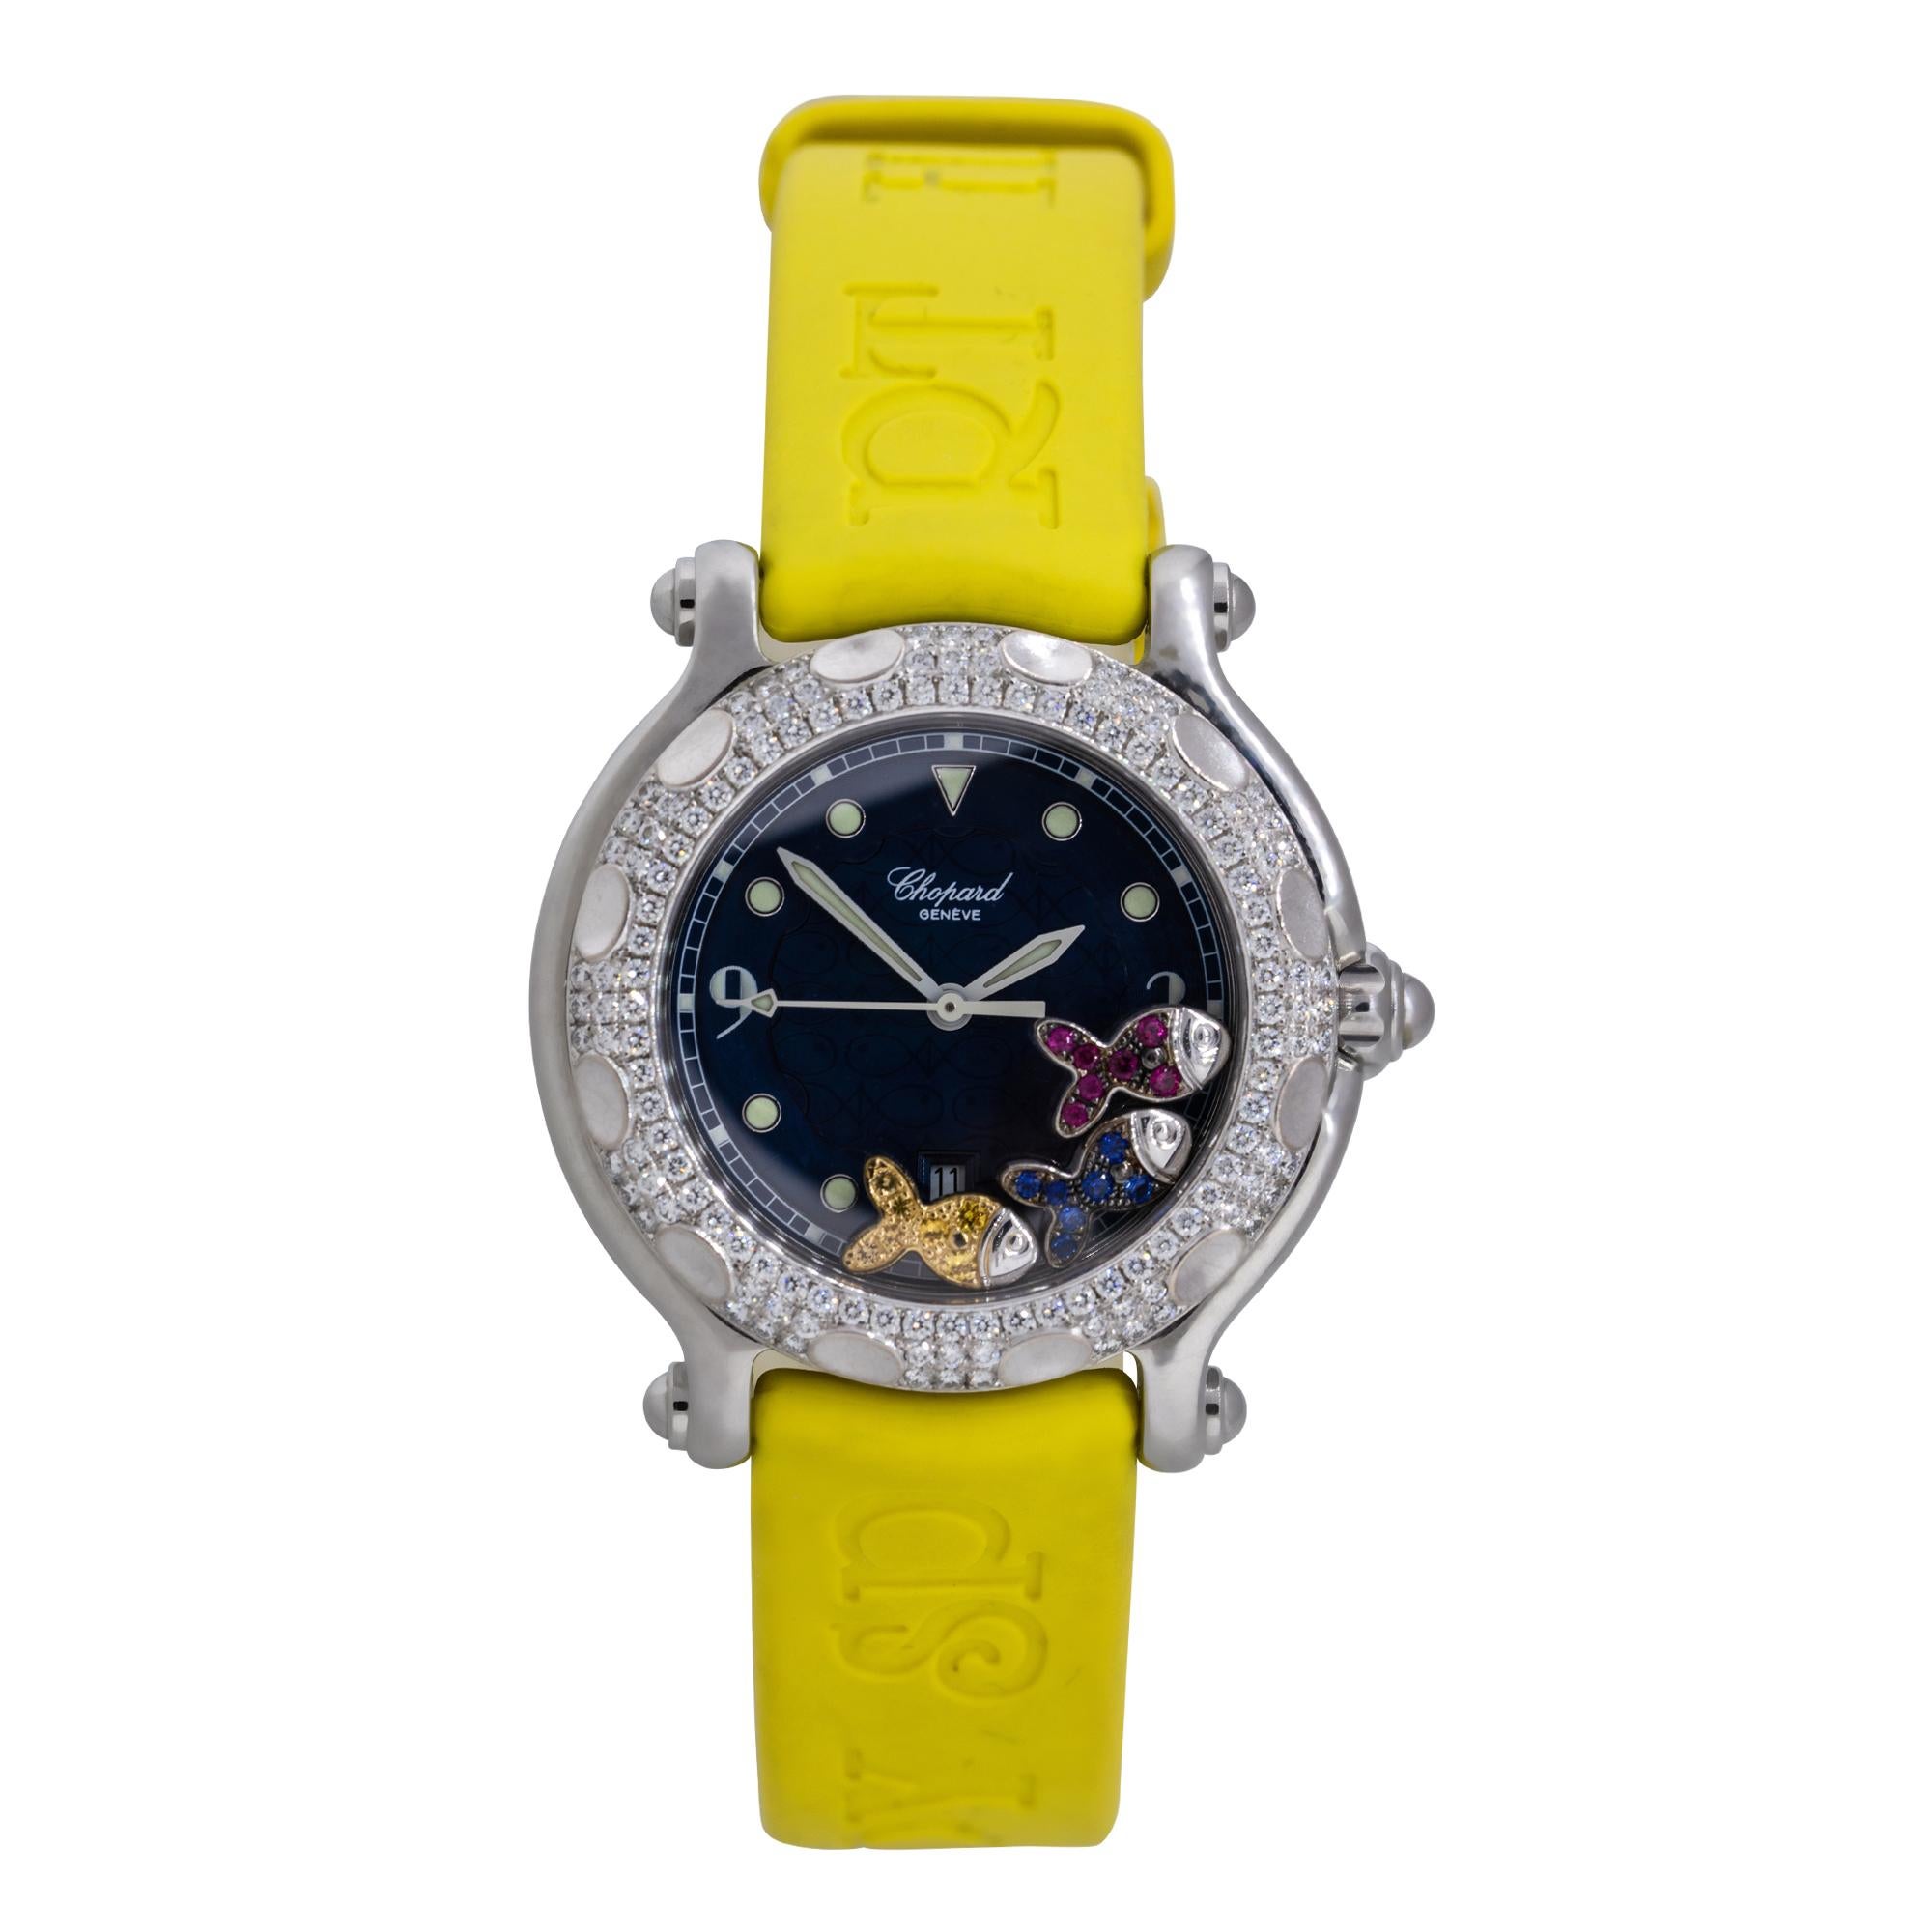 Brand: Chopard
MPN: 27/8922
Model: Happy Sport, Happy Beach
Case Material: Stainless Steel
Case Diameter: 33mm
Crystal: Scratch Resistant Sapphire
Bezel: Stainless steel Diamond bezel
Dial: Marine blue fish textured dial with red, yellow & blue